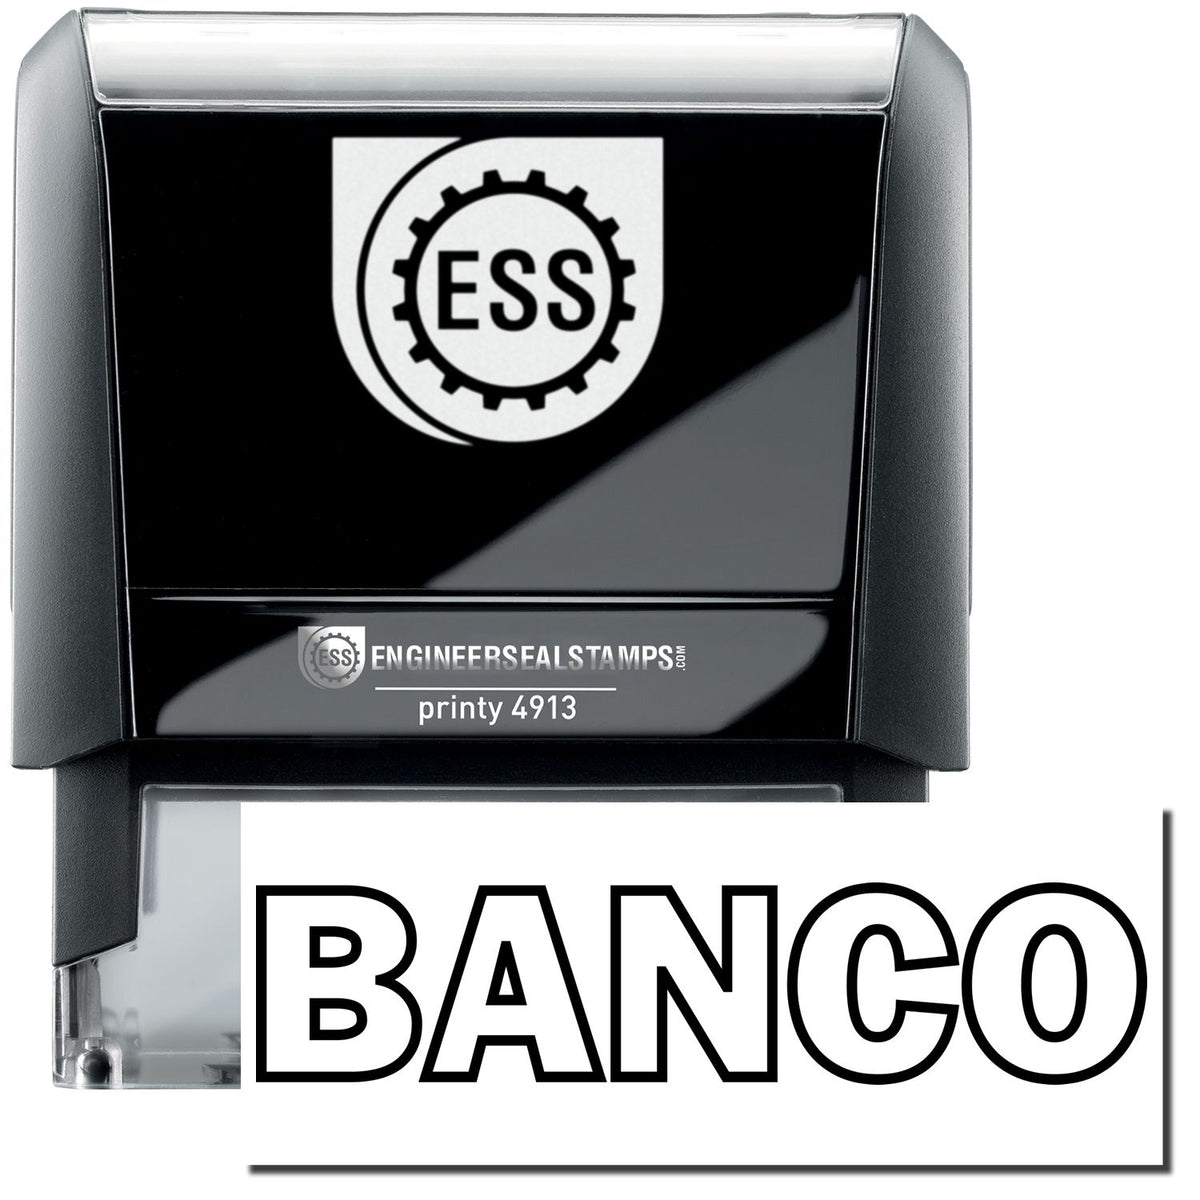 A self-inking stamp with a stamped image showing how the text &quot;BANCO&quot; in a large outline style is displayed by it after stamping.